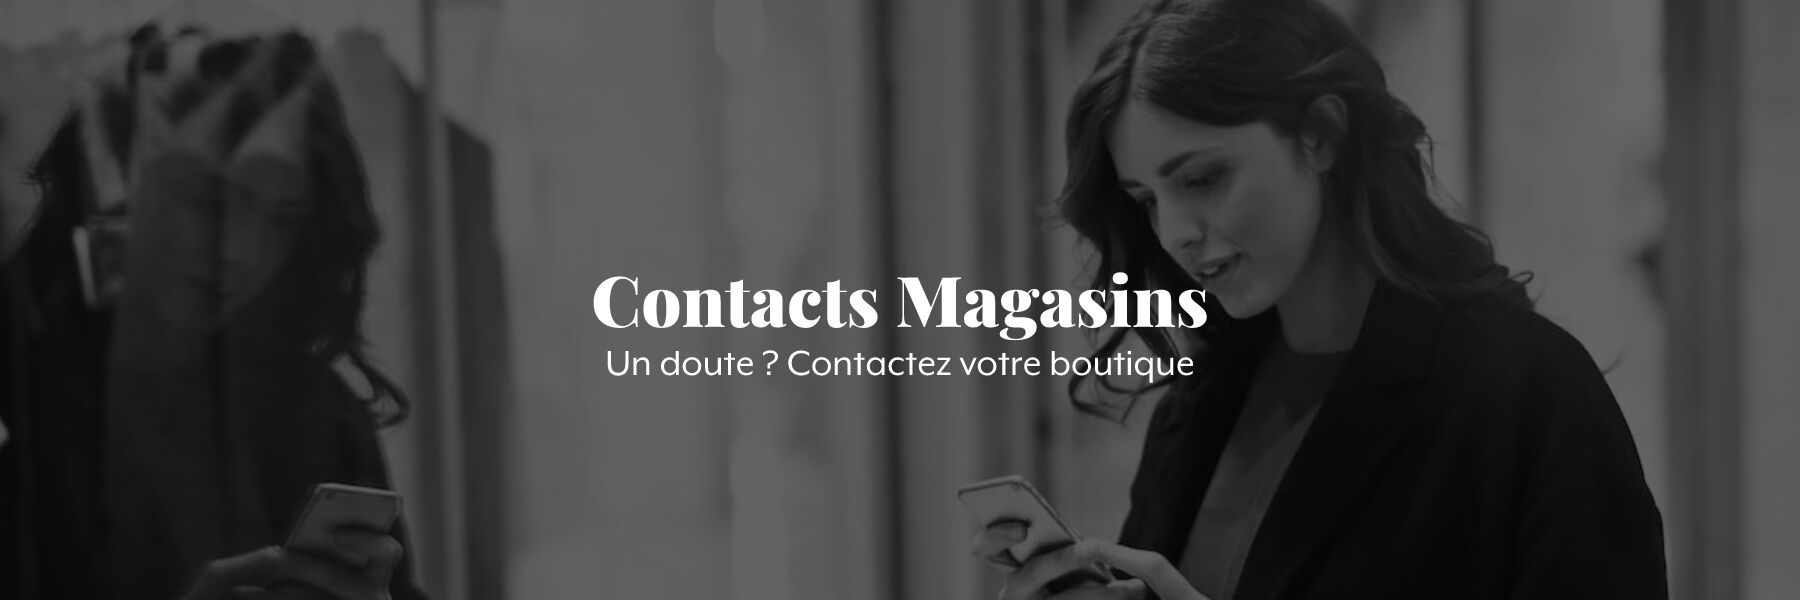 Contacts magasins